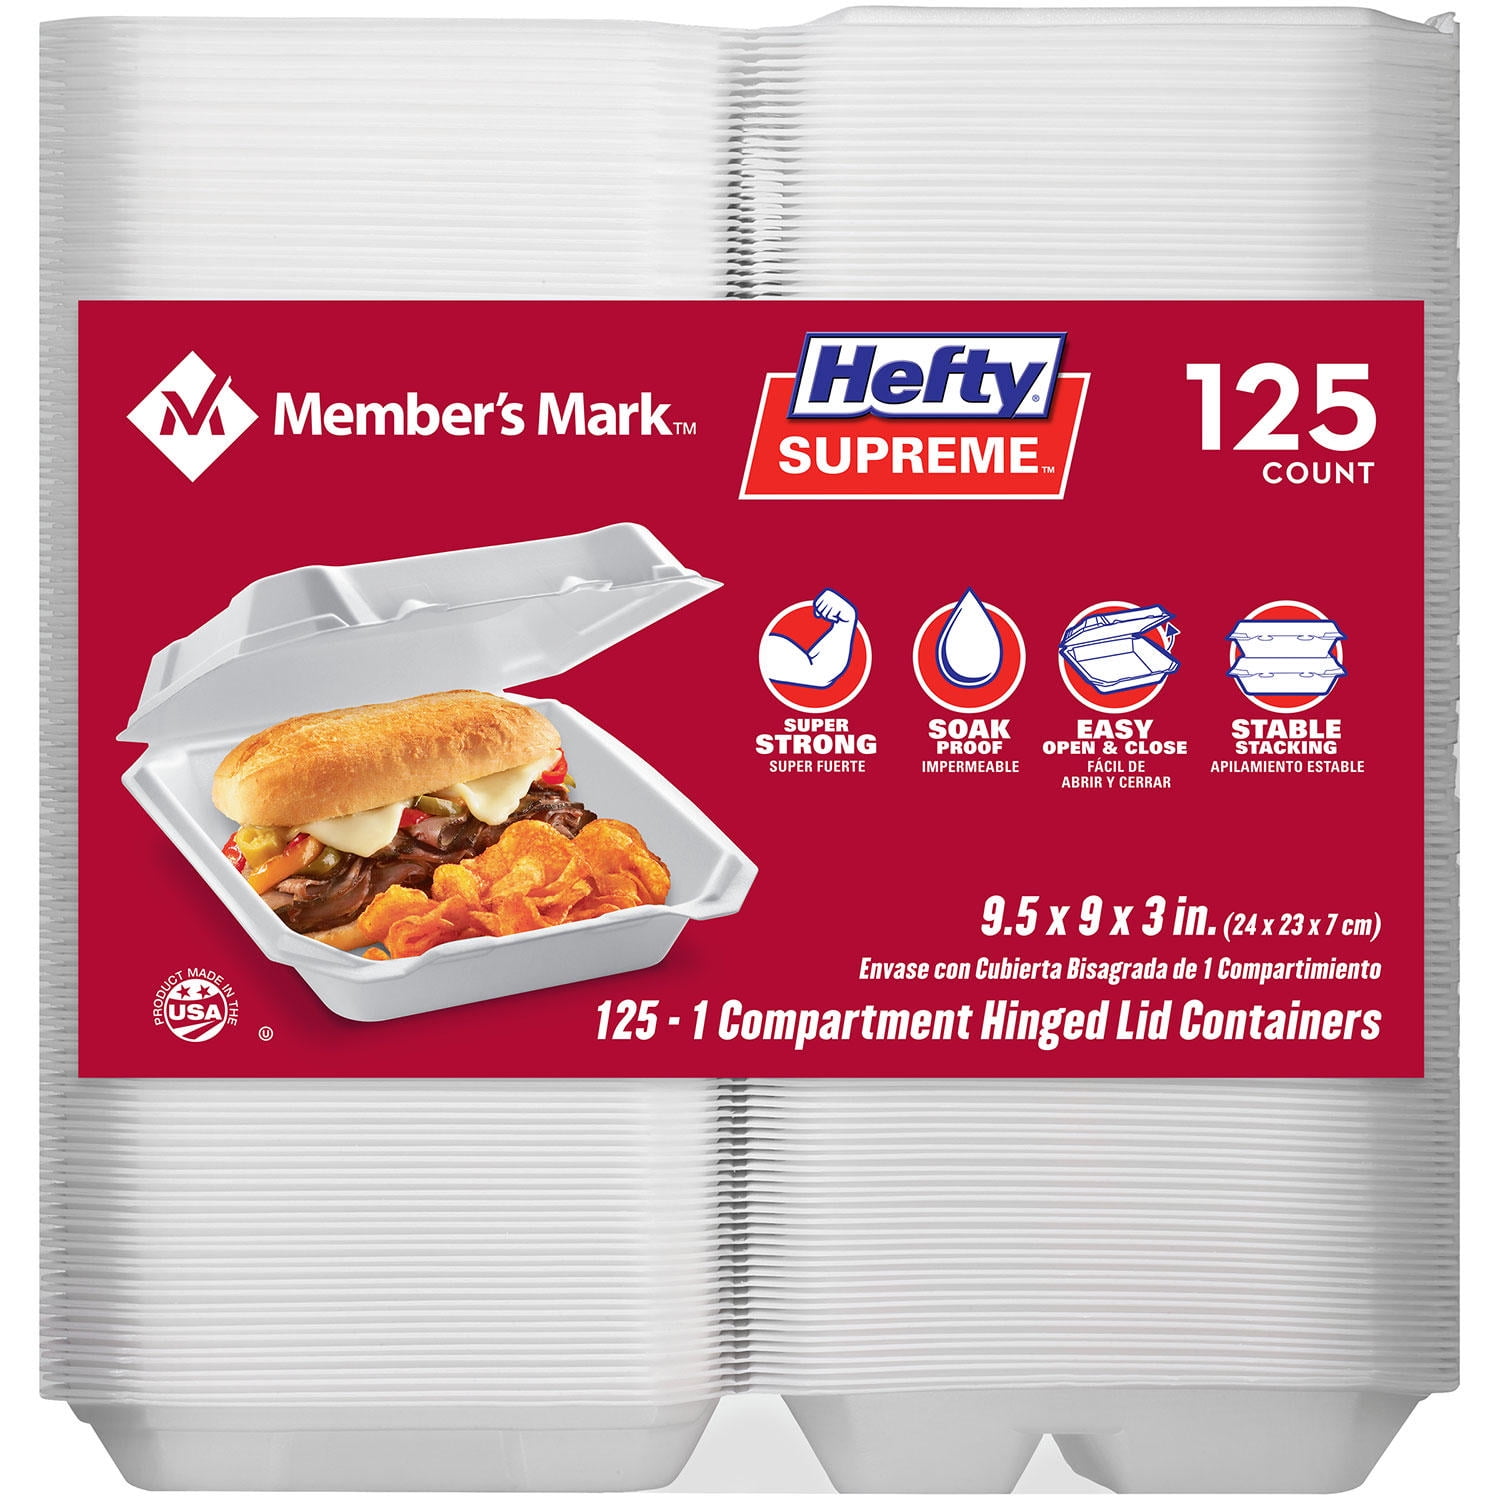 Hefty Ecosave 1 Compartment Hinged Lid Containers, 9 x 9 inch, 50 Count (Pack of 2), 100 Total